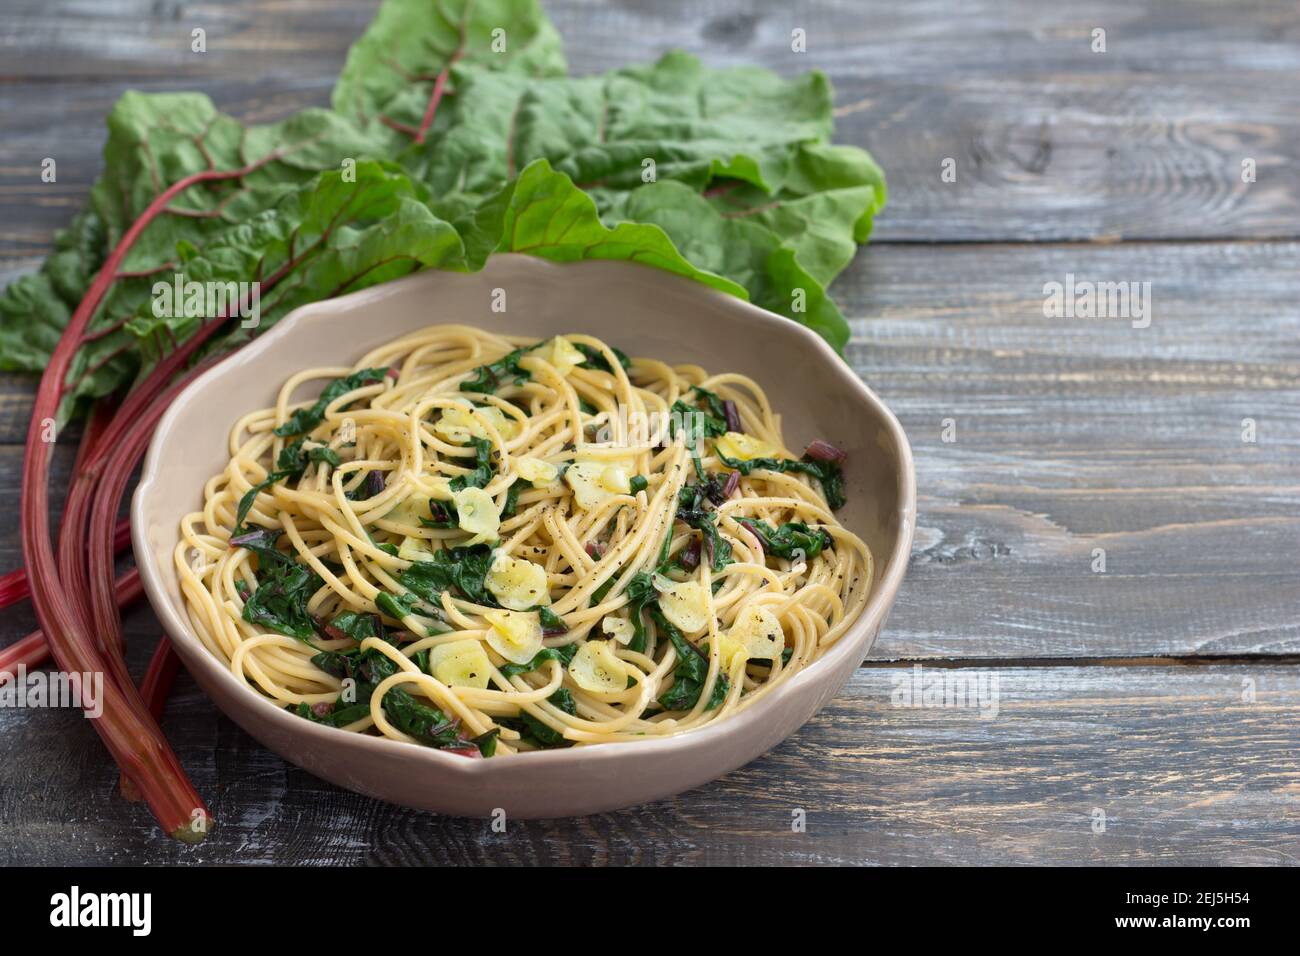 Vegan spaghetti with chard and garlic on a wooden table. Delicious homemade food Stock Photo